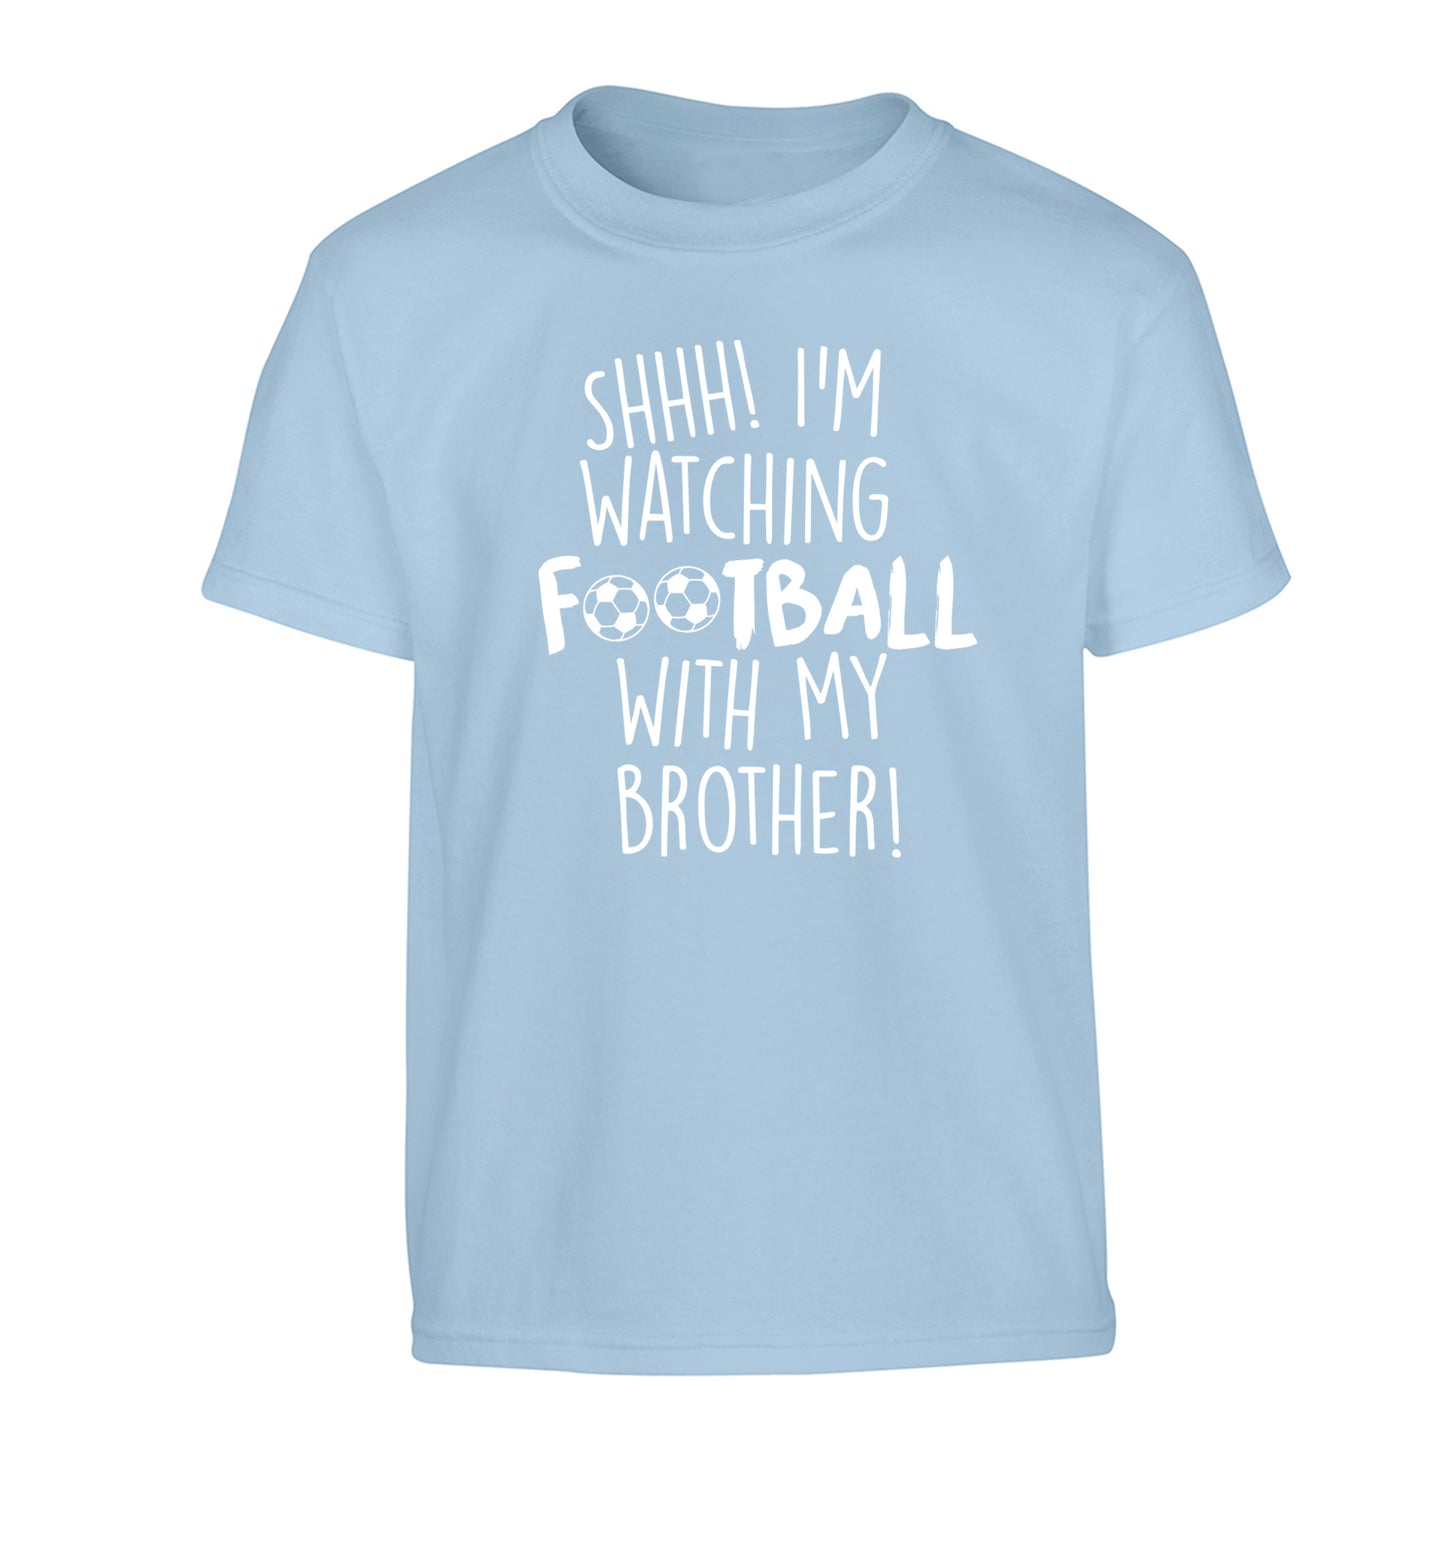 Shhh I'm watching football with my brother Children's light blue Tshirt 12-14 Years